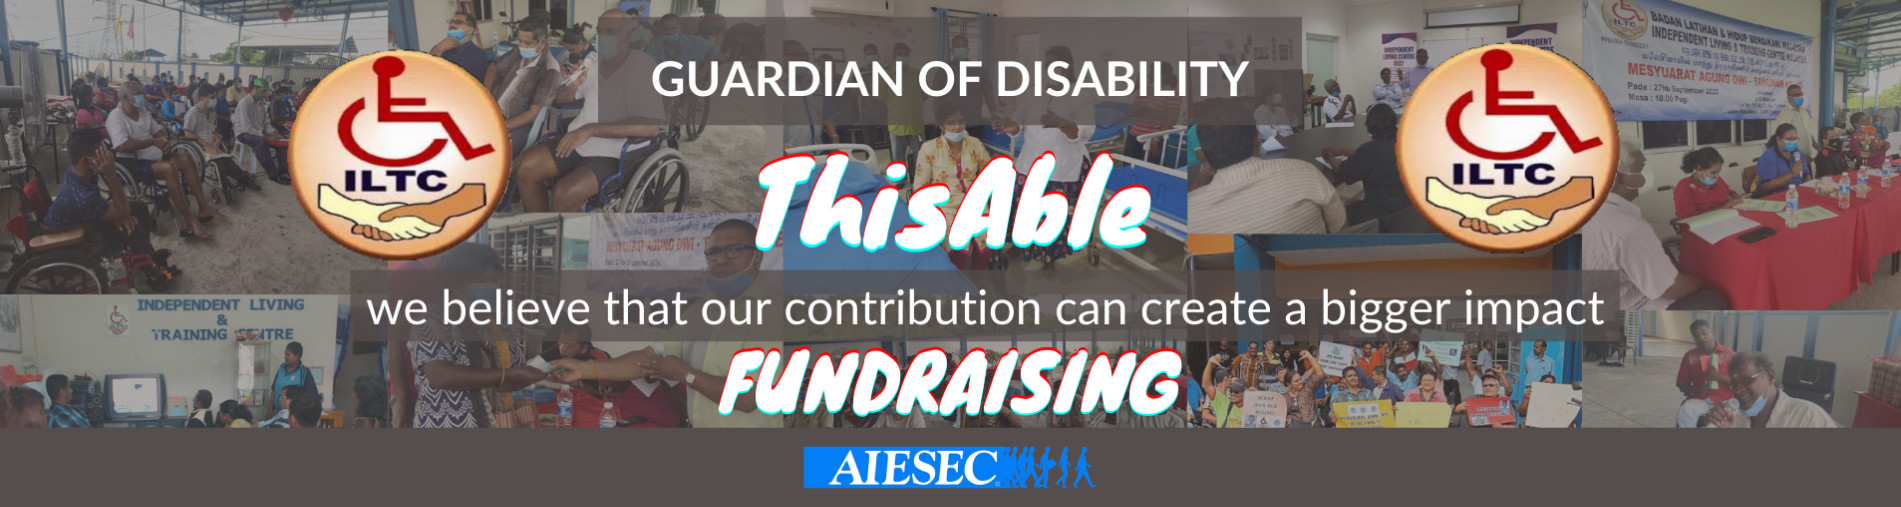 Thisable Fundraising - Guardian of Disability